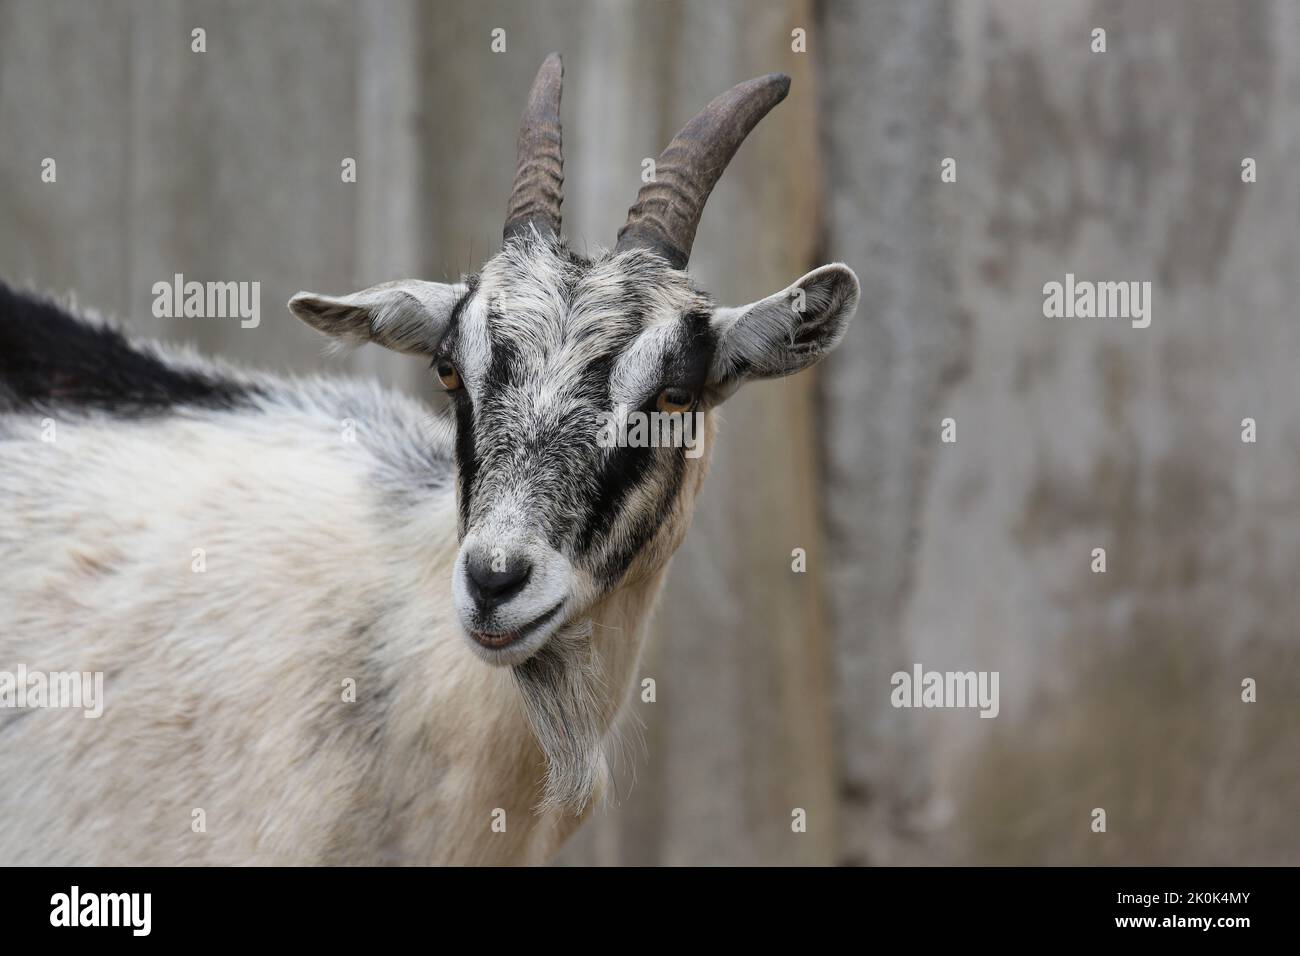 Young goat close up of head in a farm yard Stock Photo